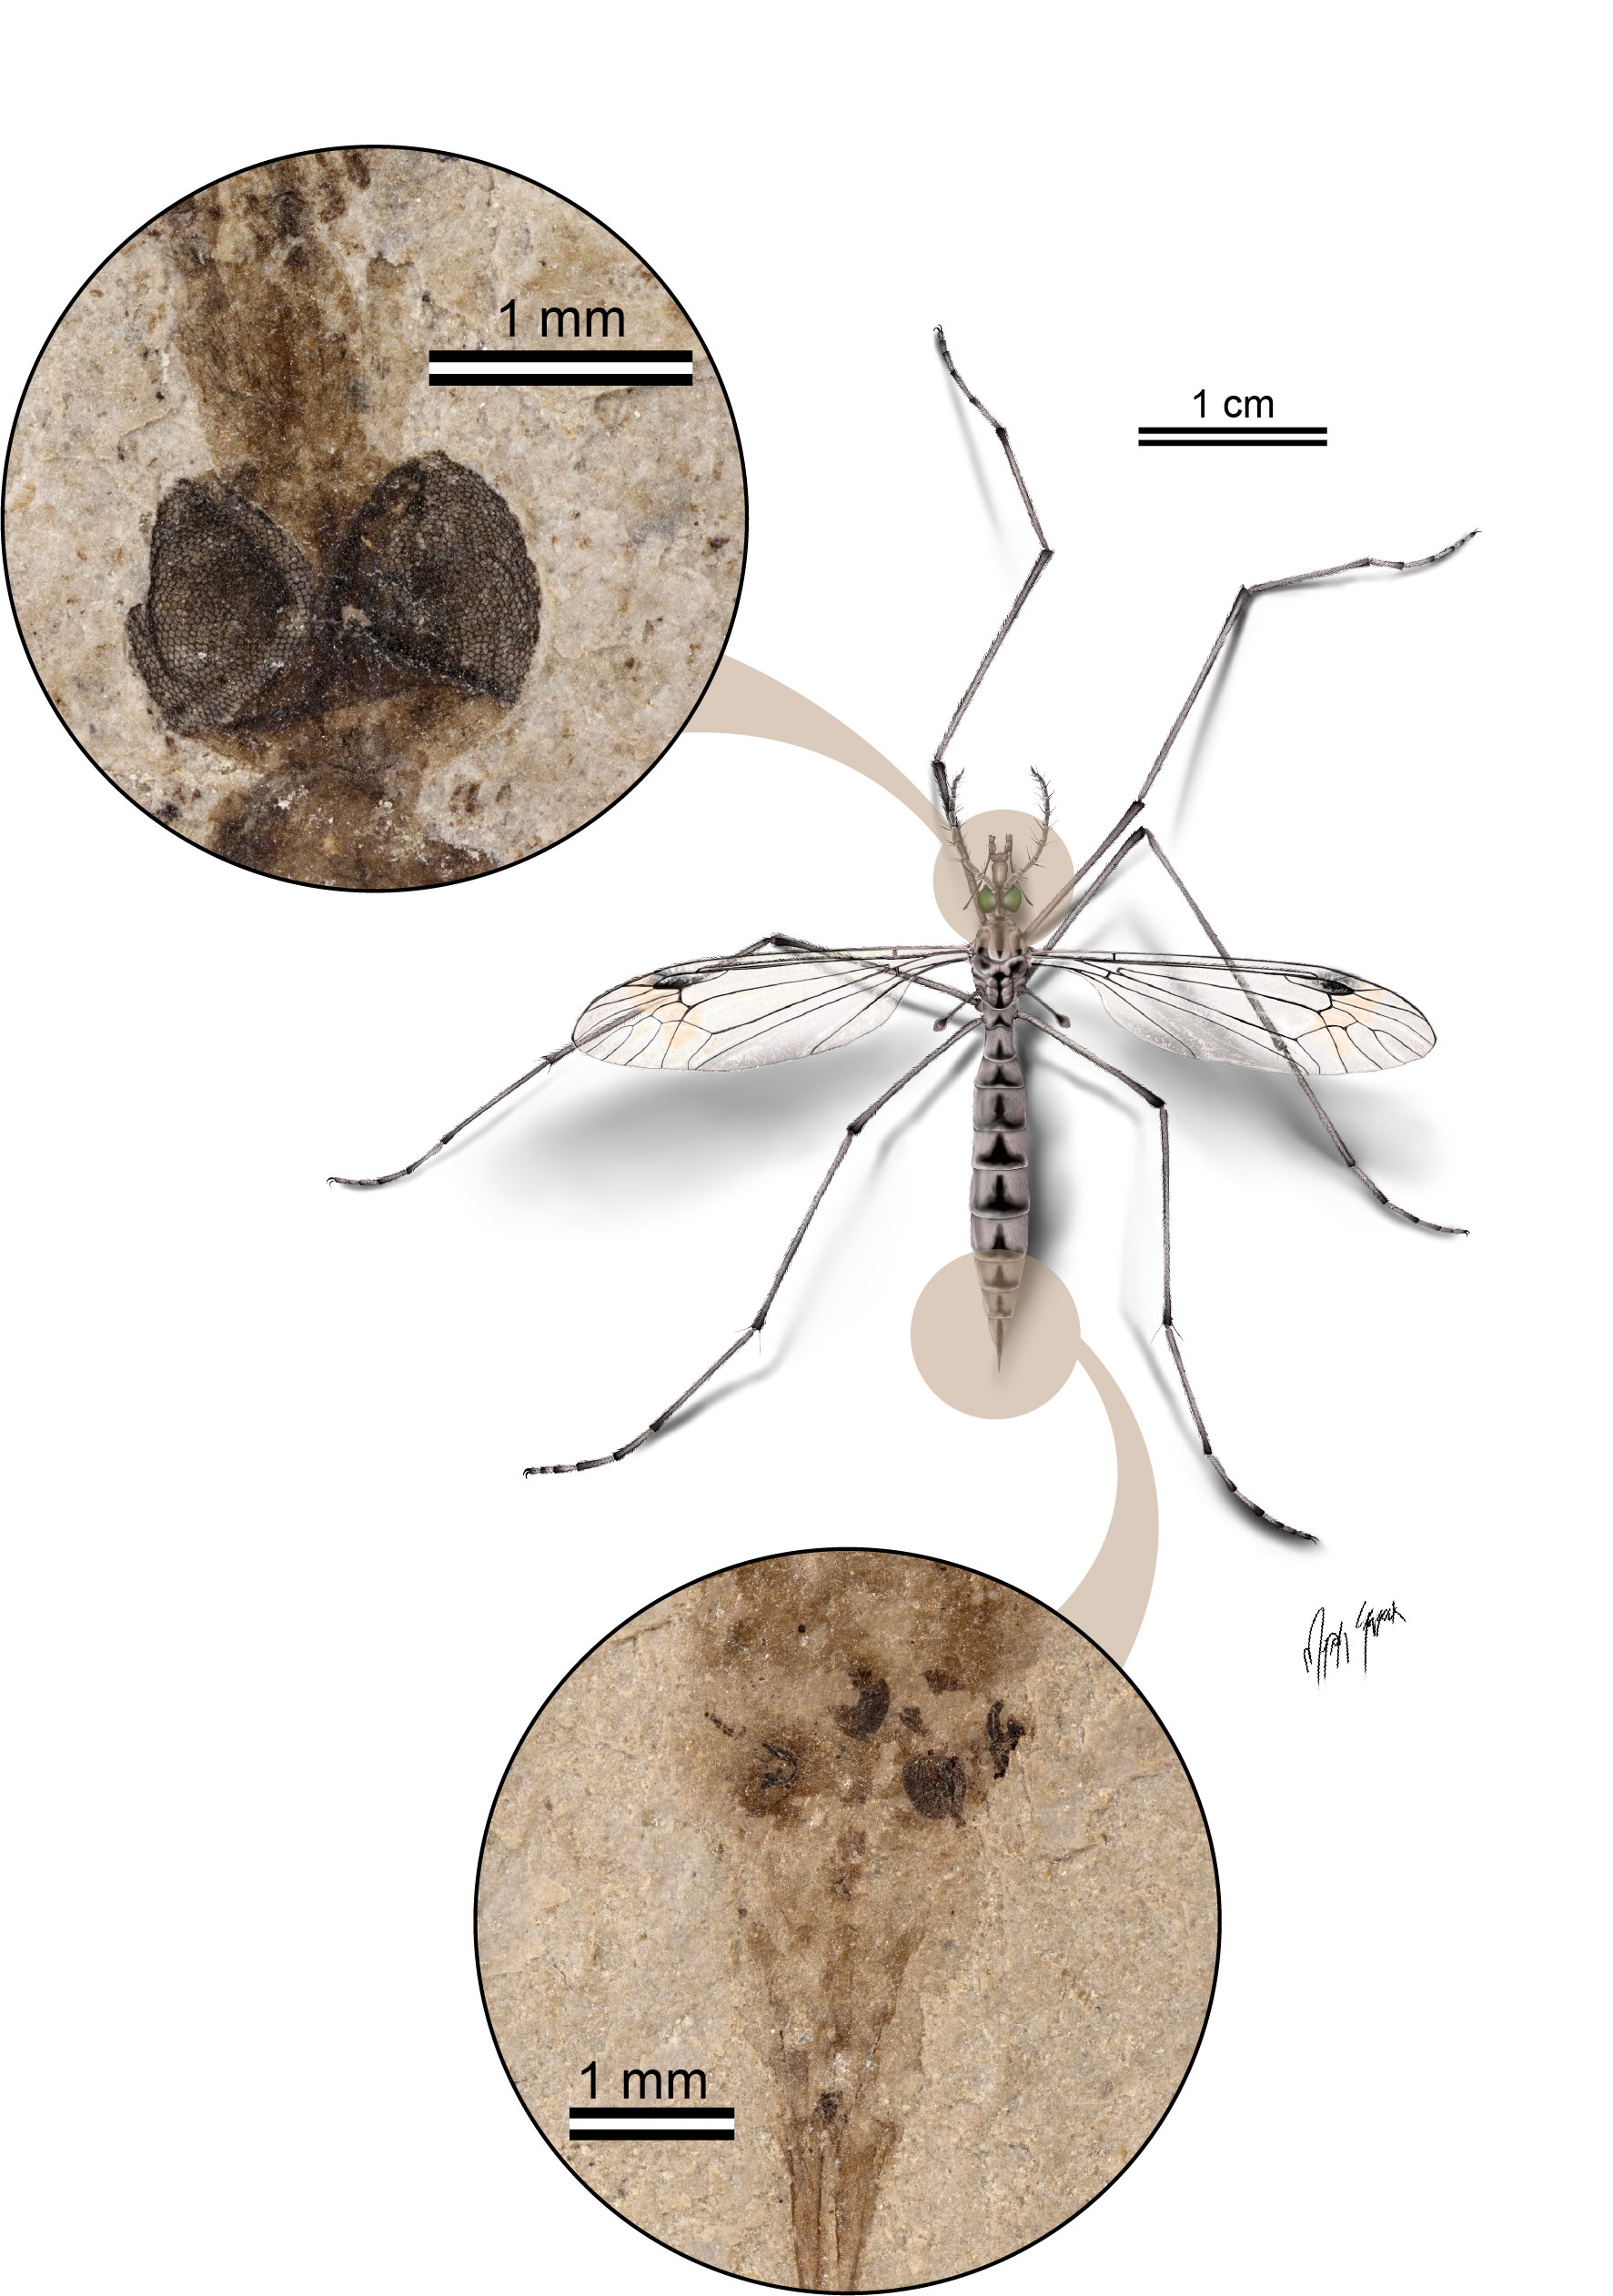 A grey crane fly on a white background with two cicrular insets showing close ups of fossilized eye and female reproductive organs..